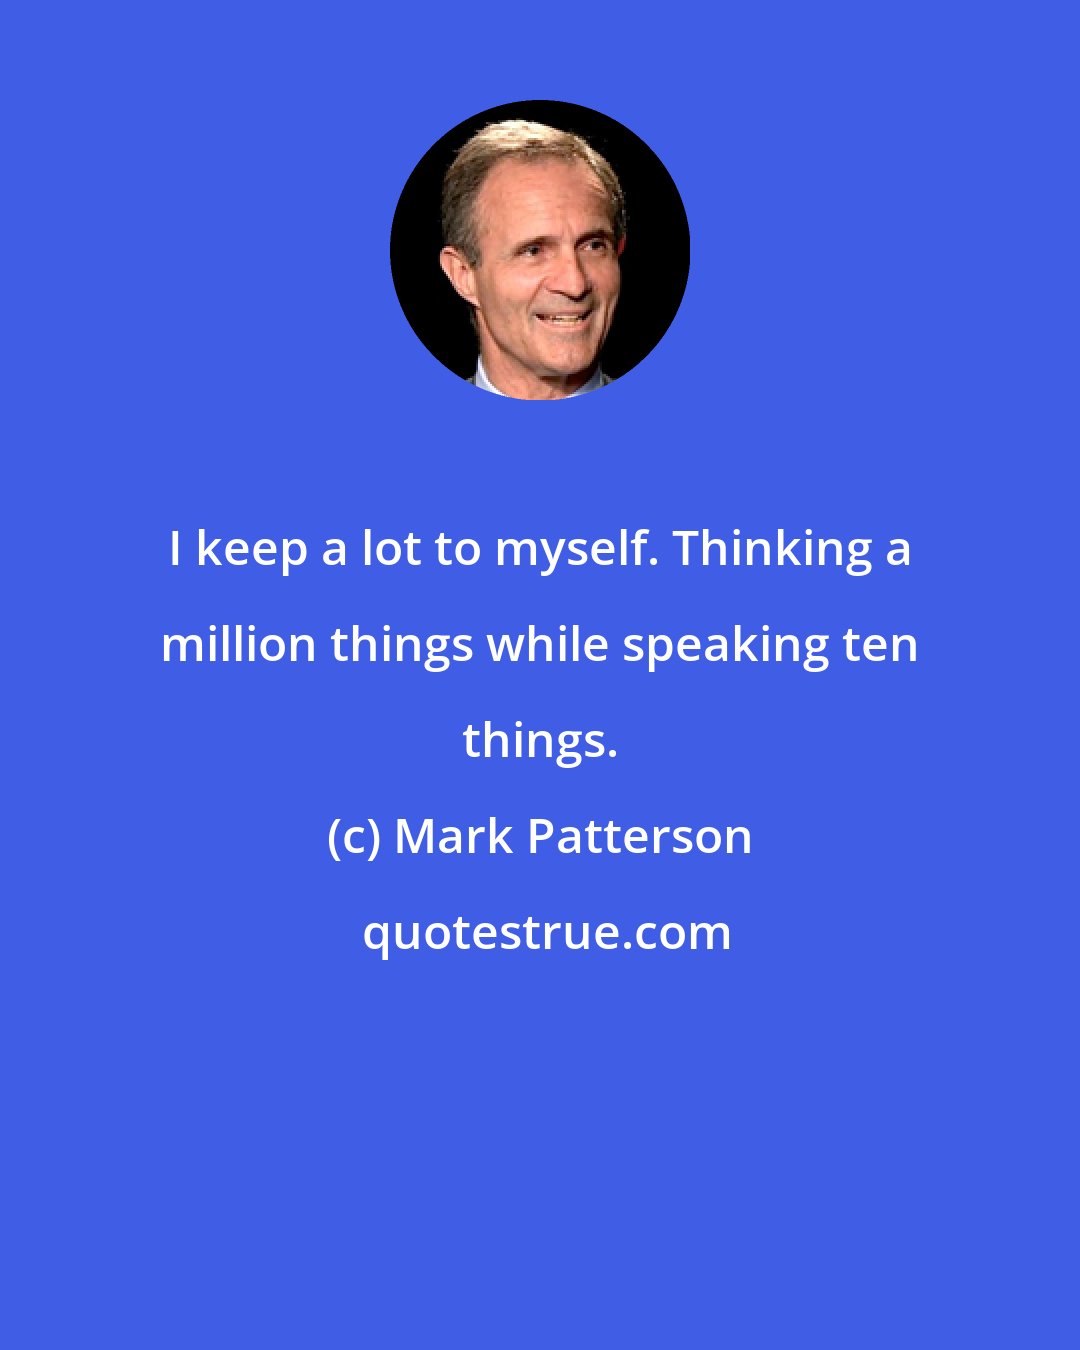 Mark Patterson: I keep a lot to myself. Thinking a million things while speaking ten things.